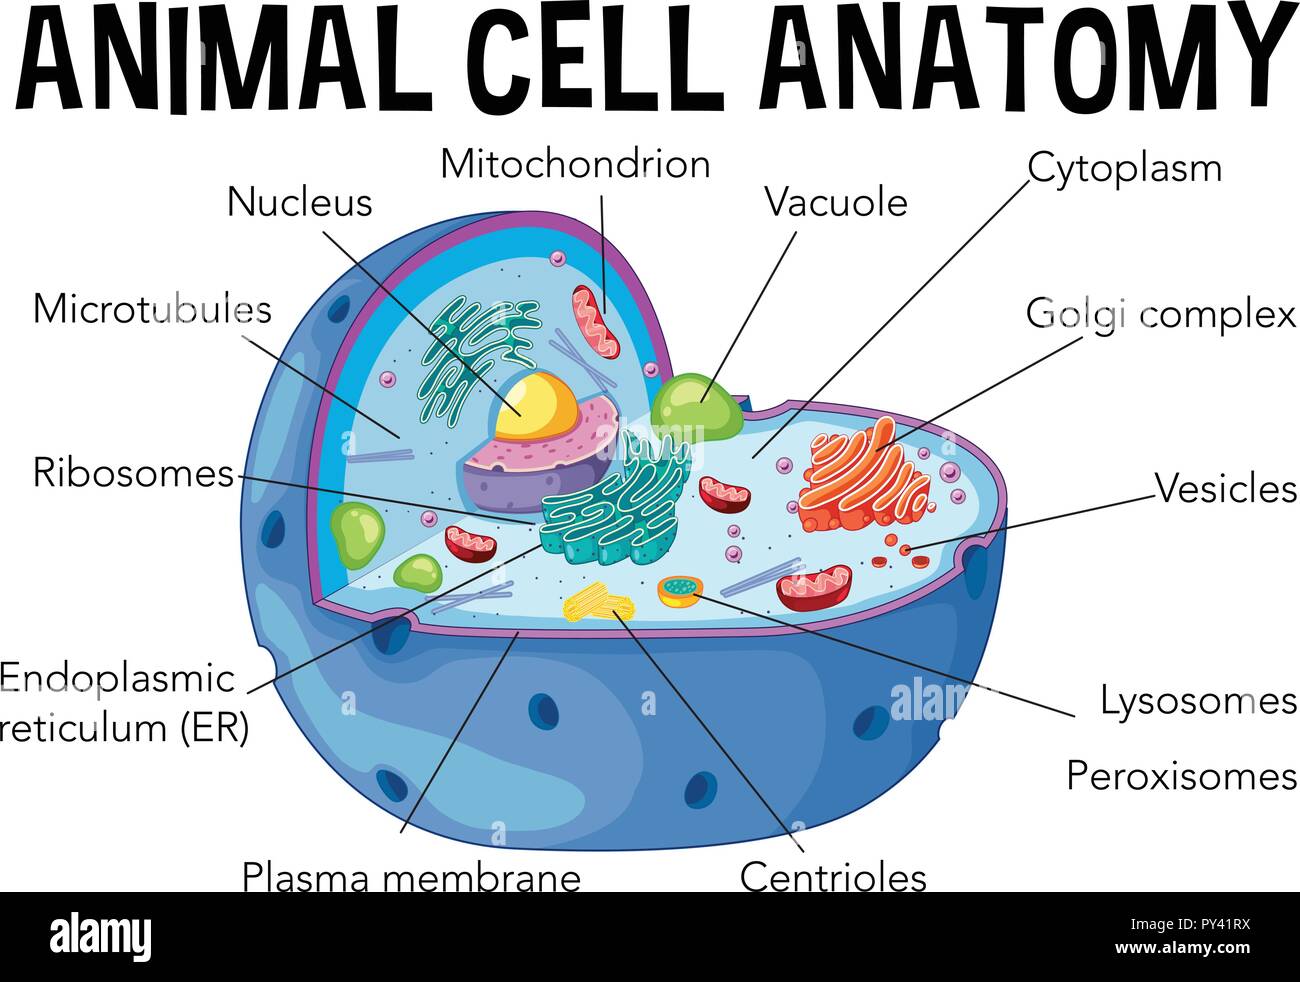 What is the correct diagram of plant and animal cell? - Quora